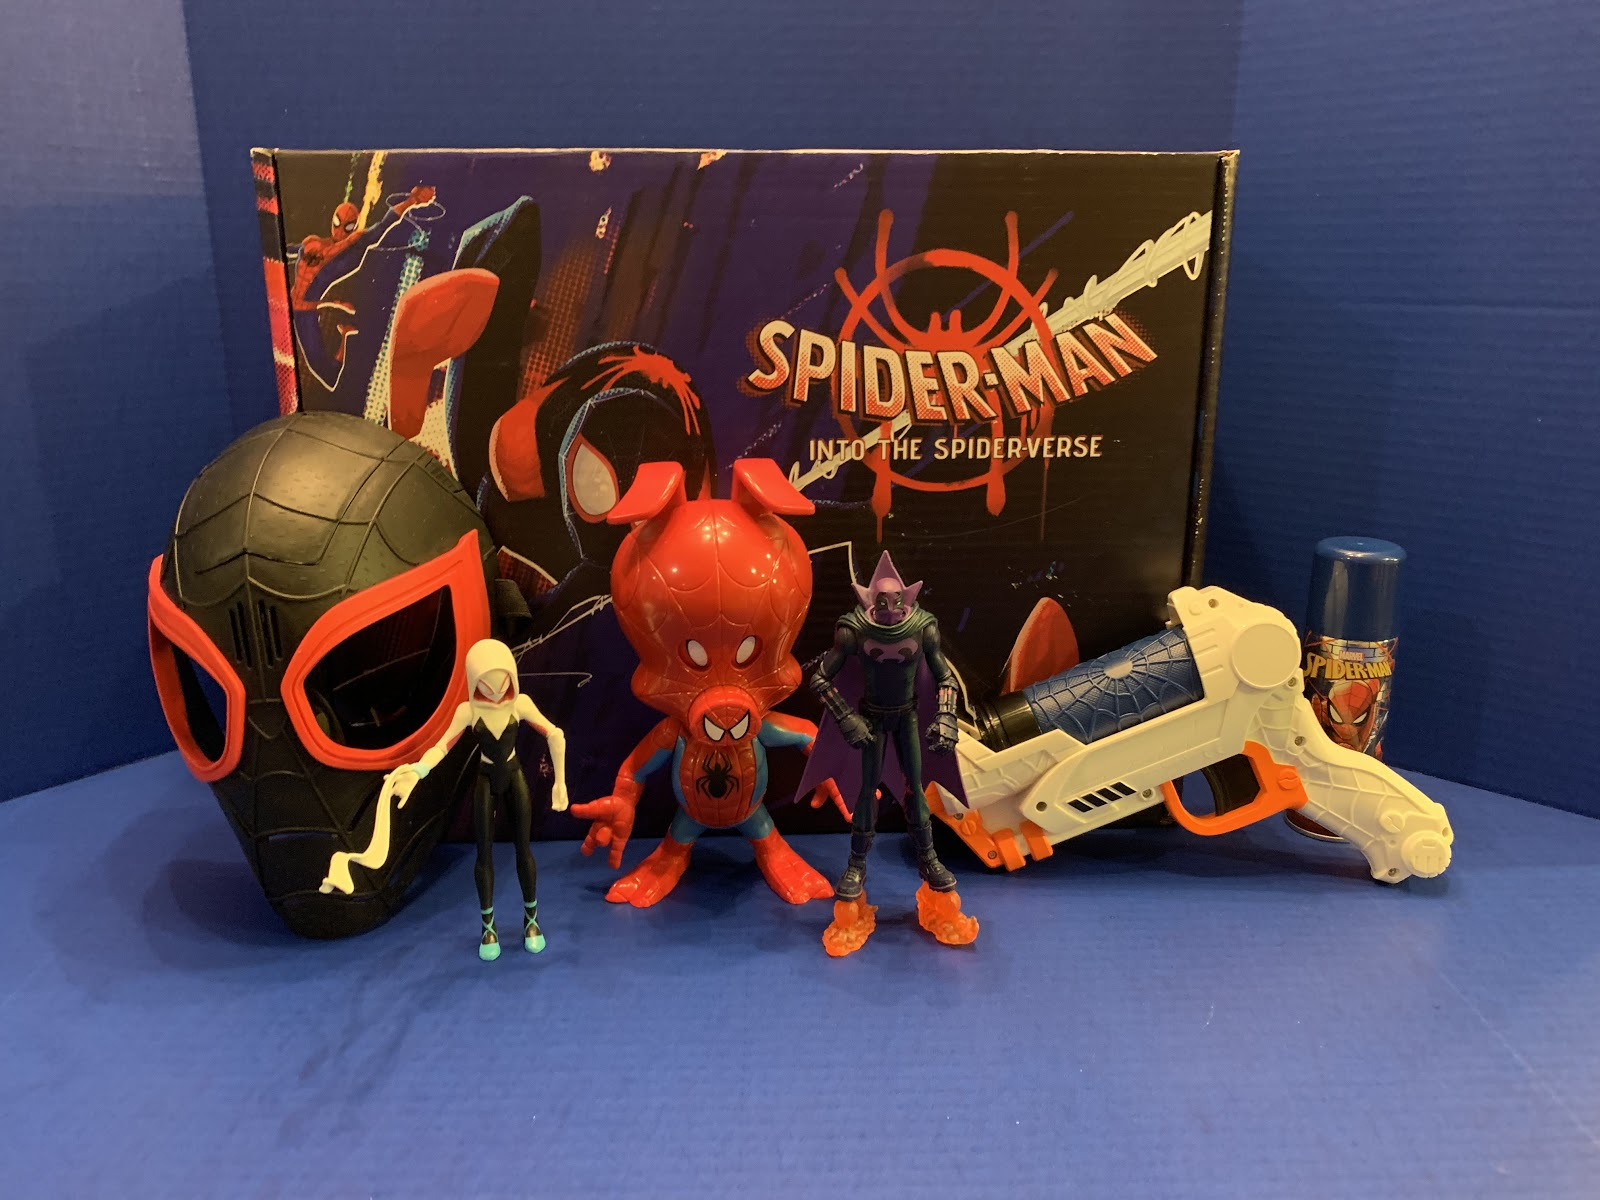 Toy Review - "Spider Man: Into the Spider-Verse" by Hasbro